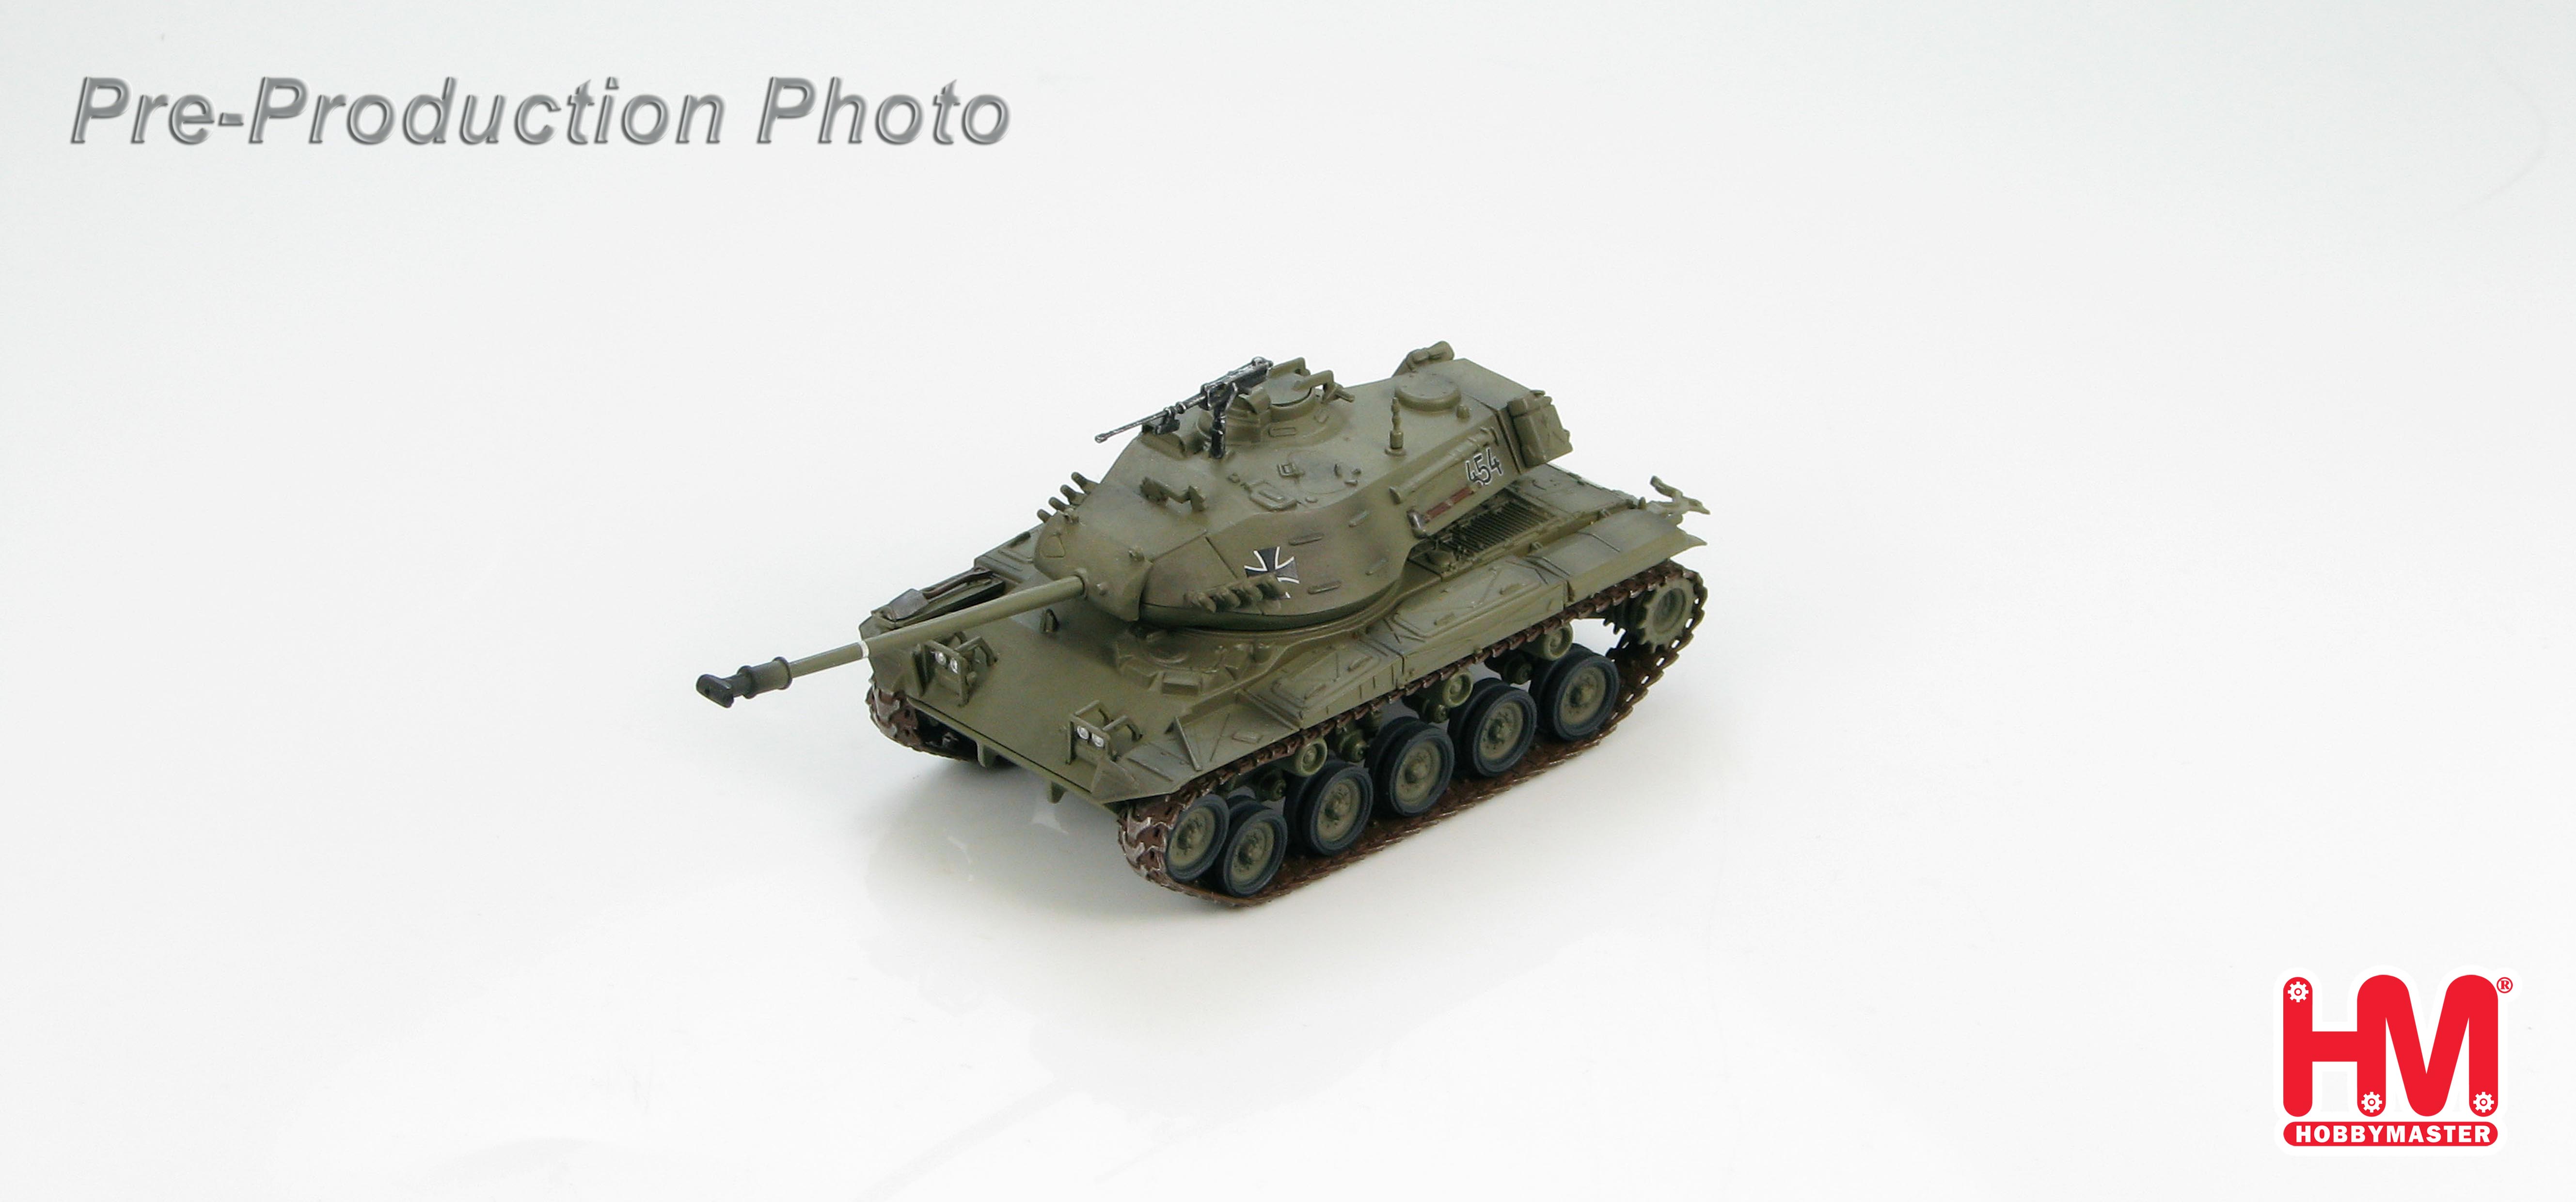 HG5305 M41G WALKER BULLDOG GERMAN ARMY 1950S 172 SCALE - Click Image to Close